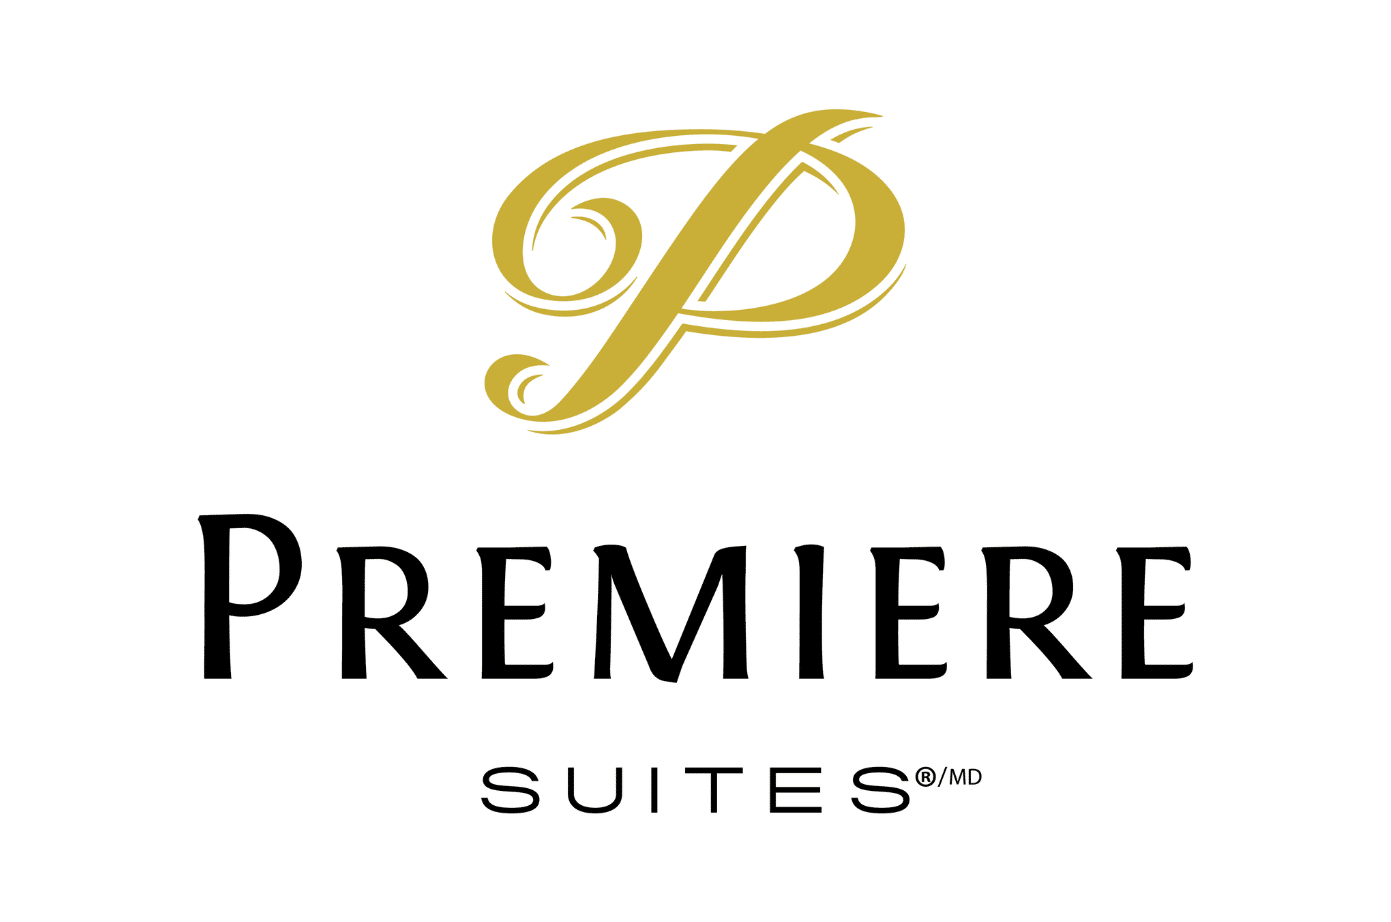 Corporate Housing Leader Premiere Suites Announces Launch of Canada’s Foremost National Insurance Temporary Housing Program